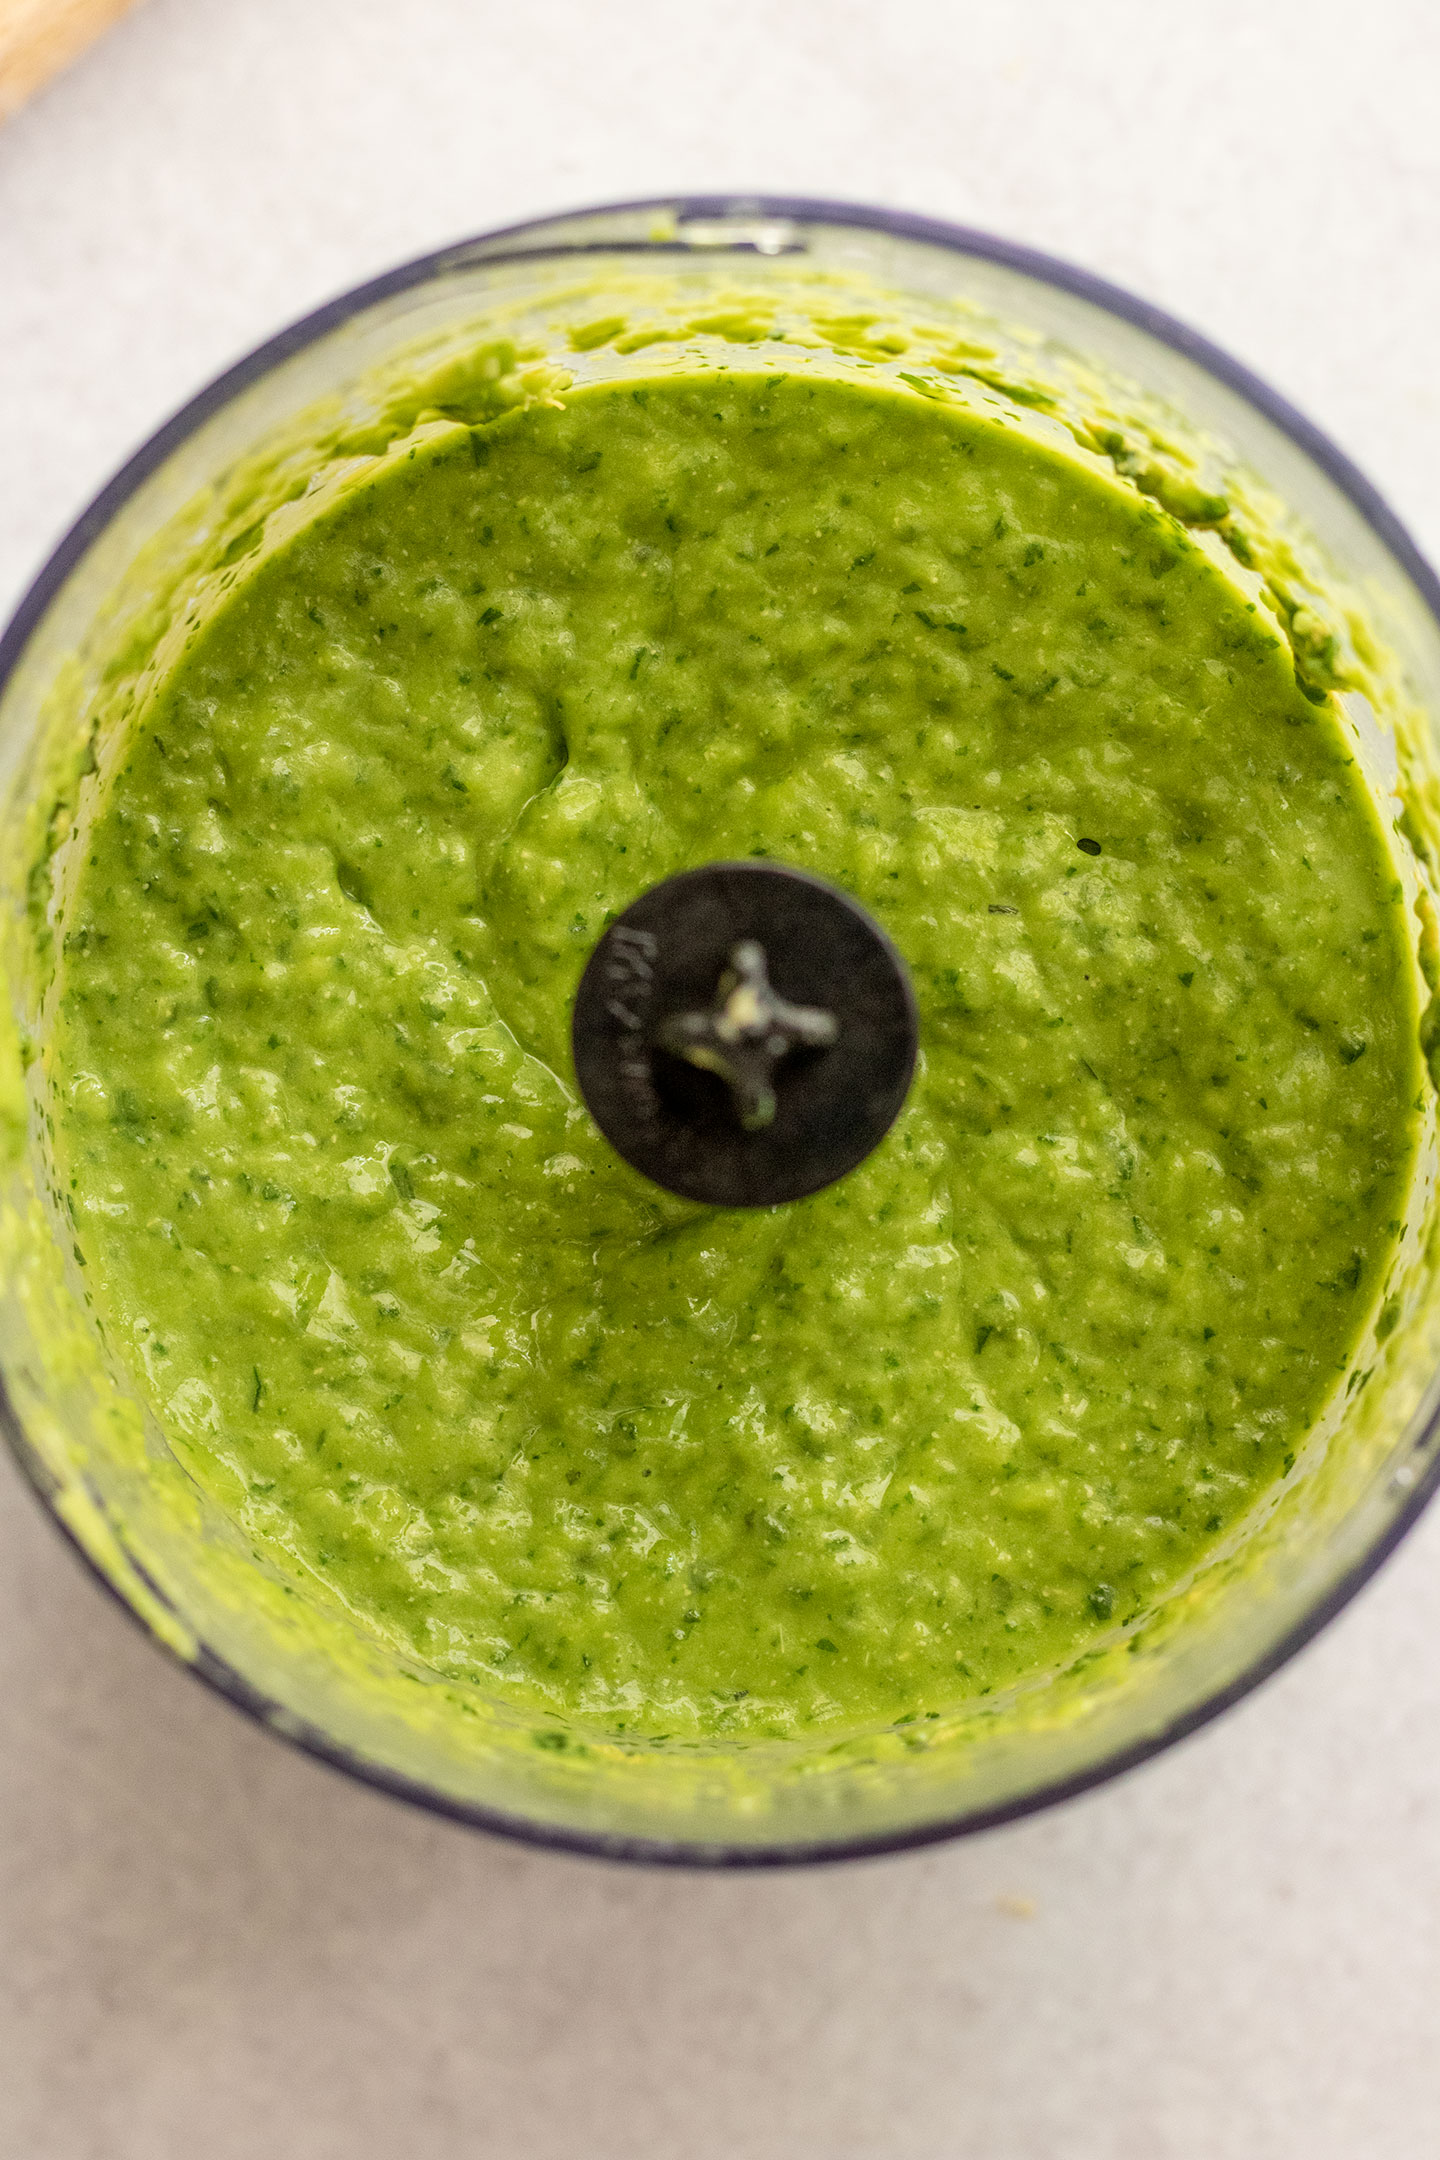 Blended green goddess dressing in a small food processor.